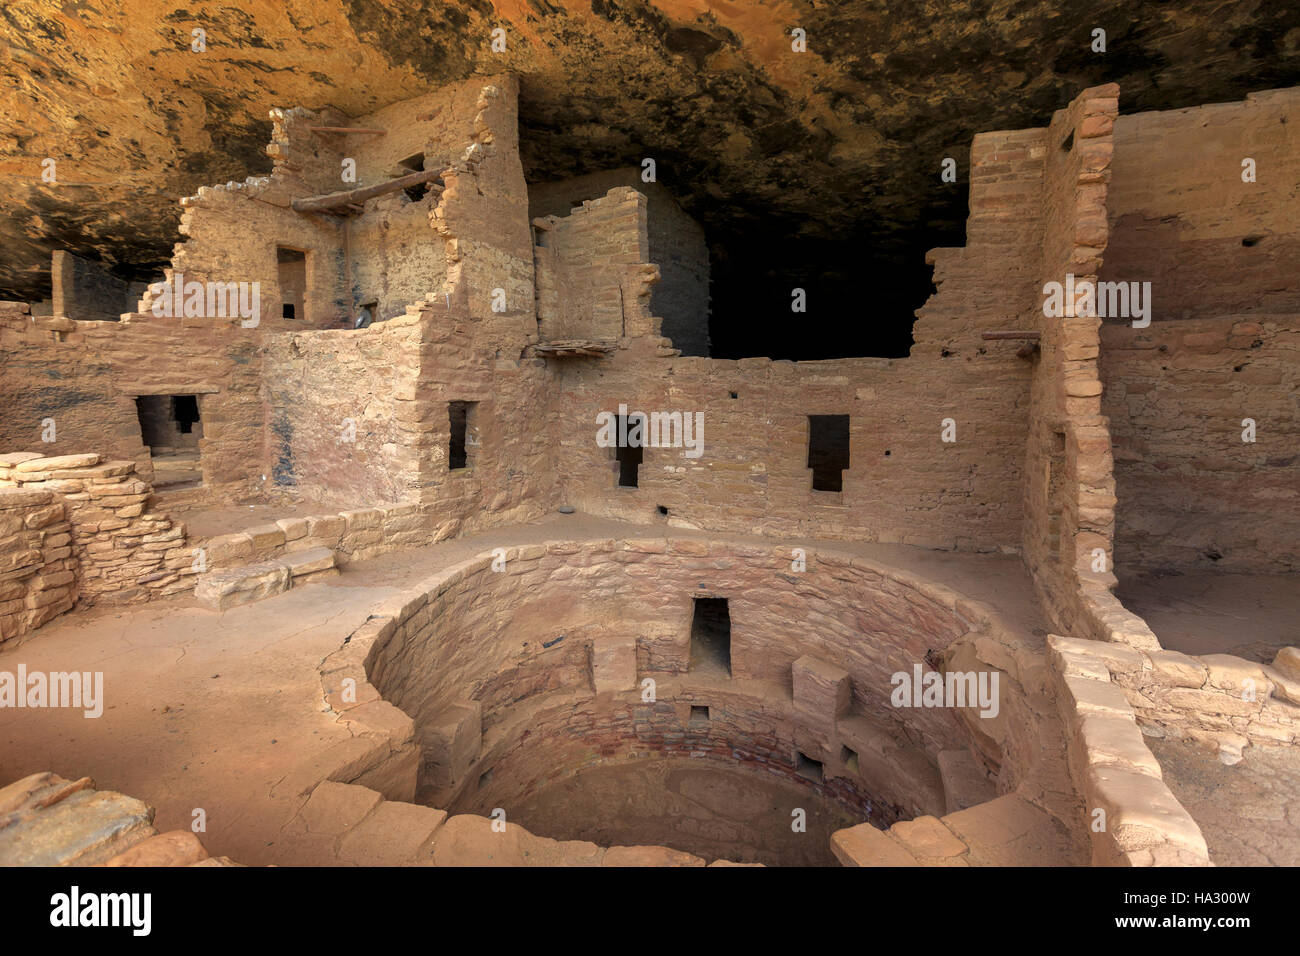 A close-up view of a section of the Spruce Tree House, the third largest cliff dwelling in Mesa Verde National Park Colorado USA Stock Photo